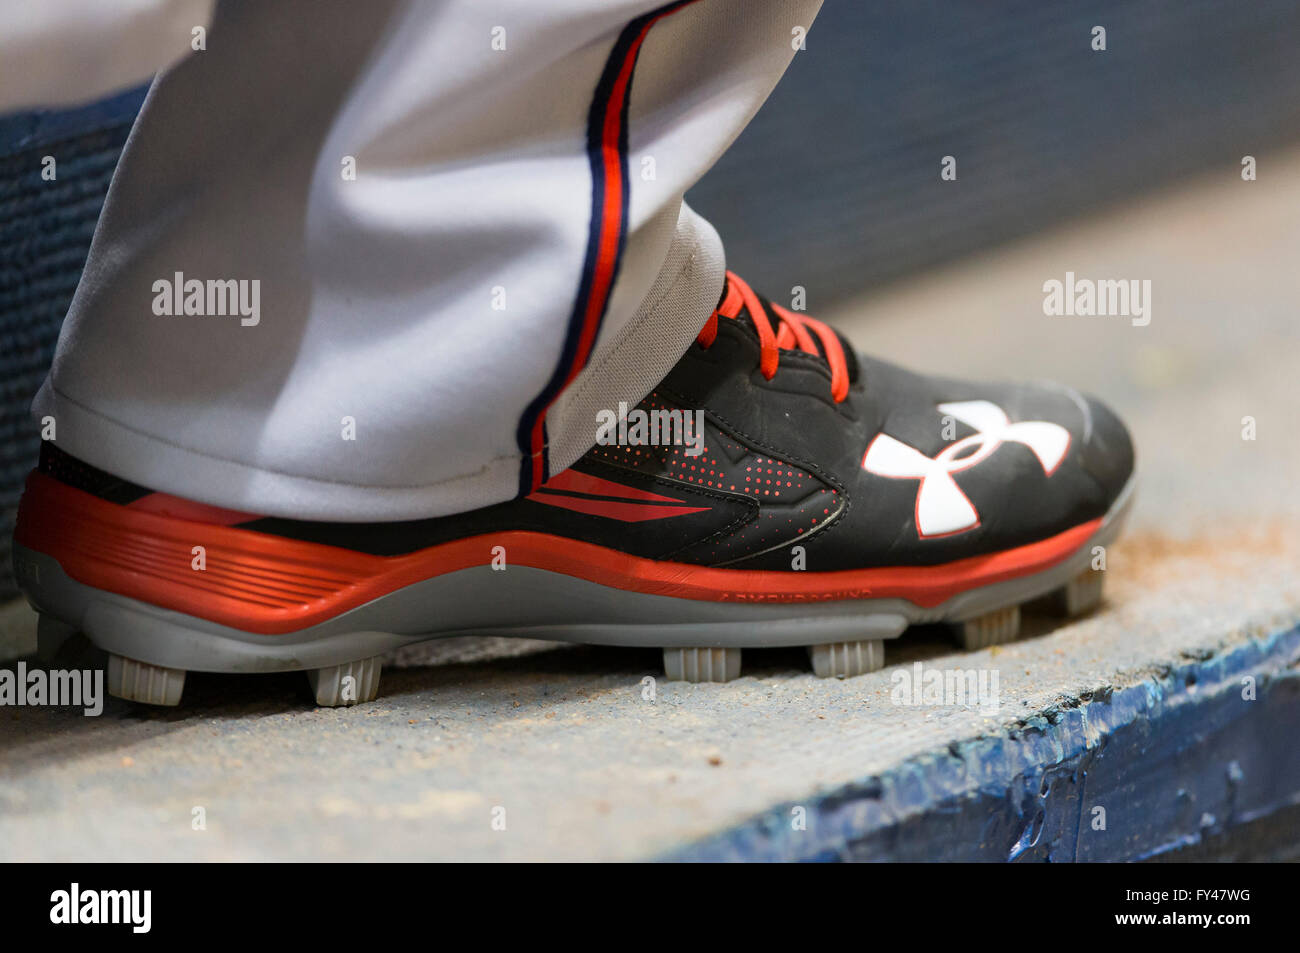 Under armor hi-res stock photography and images - Alamy